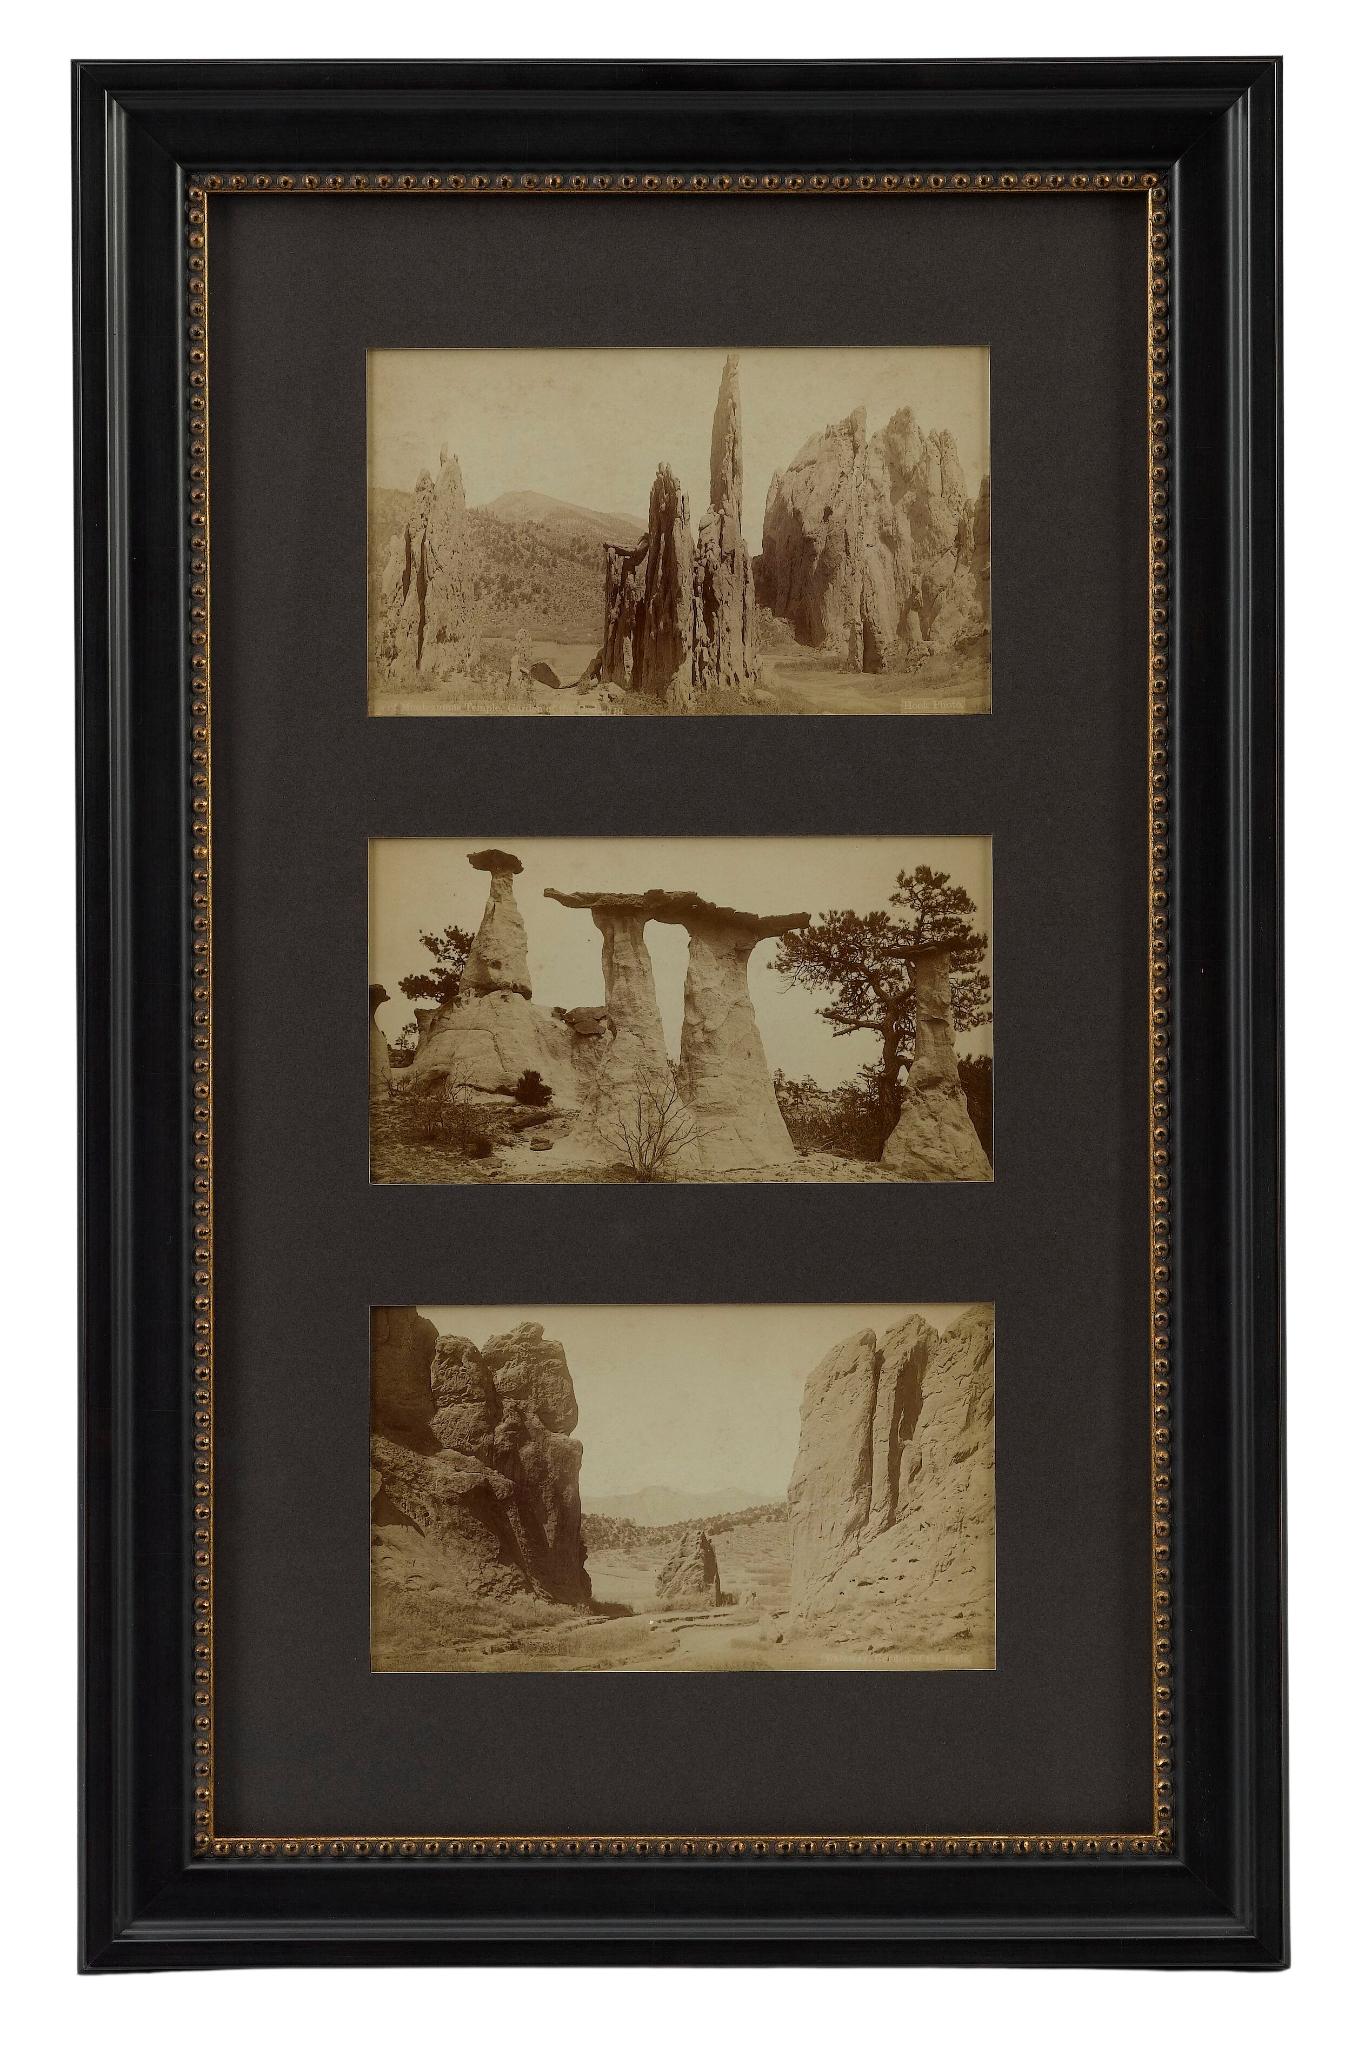 Presented is a collage of three vintage cabinet card photographs of the Garden of the Gods, in Colorado dating to the 1890s. The sepia toned photographs were published by W.E. Hook View, Stationery and Book Company. The photographs capture views of